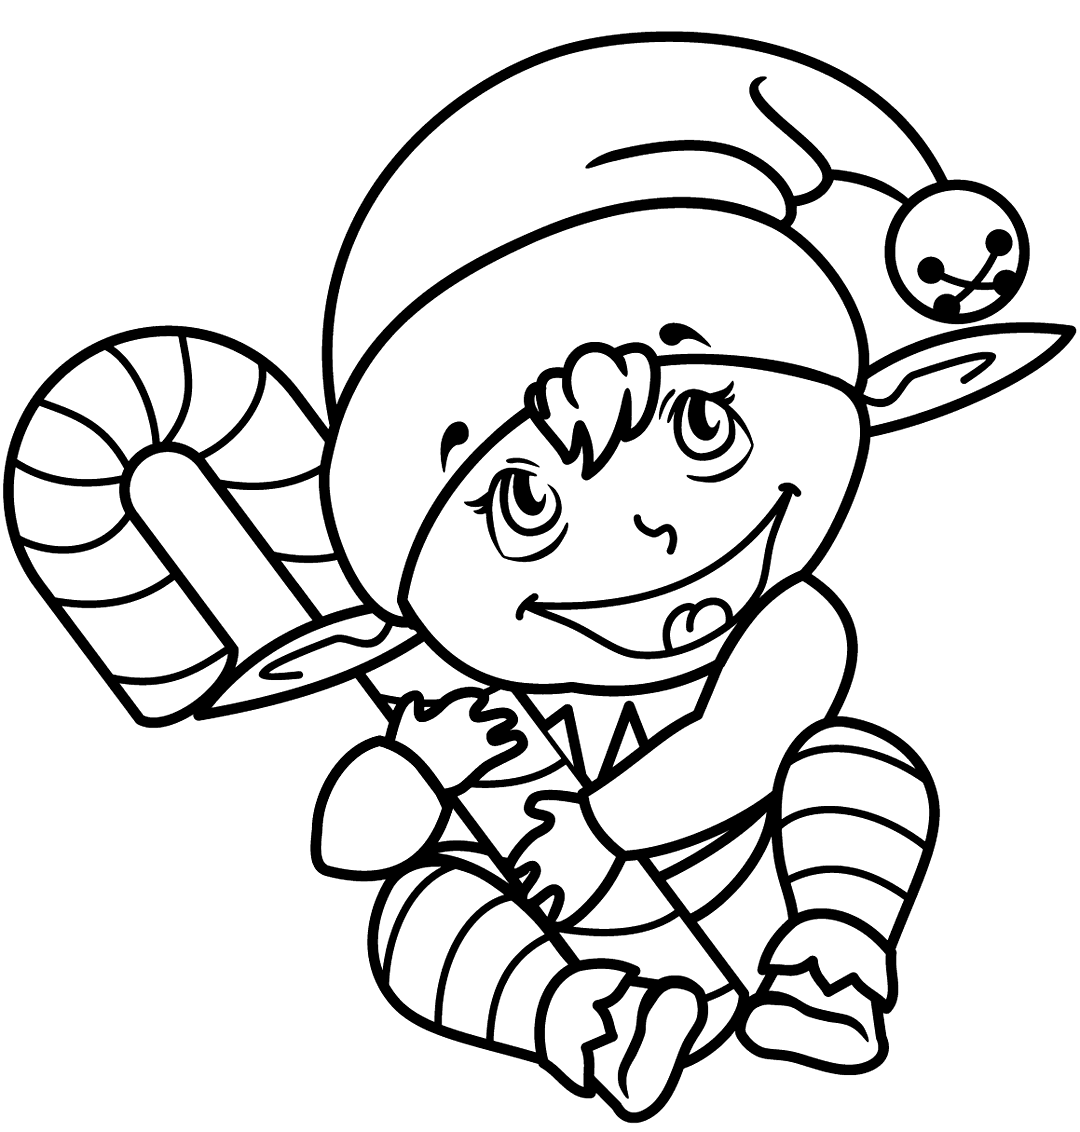 Cute Christmas Elf With Candy Cane Coloring Page